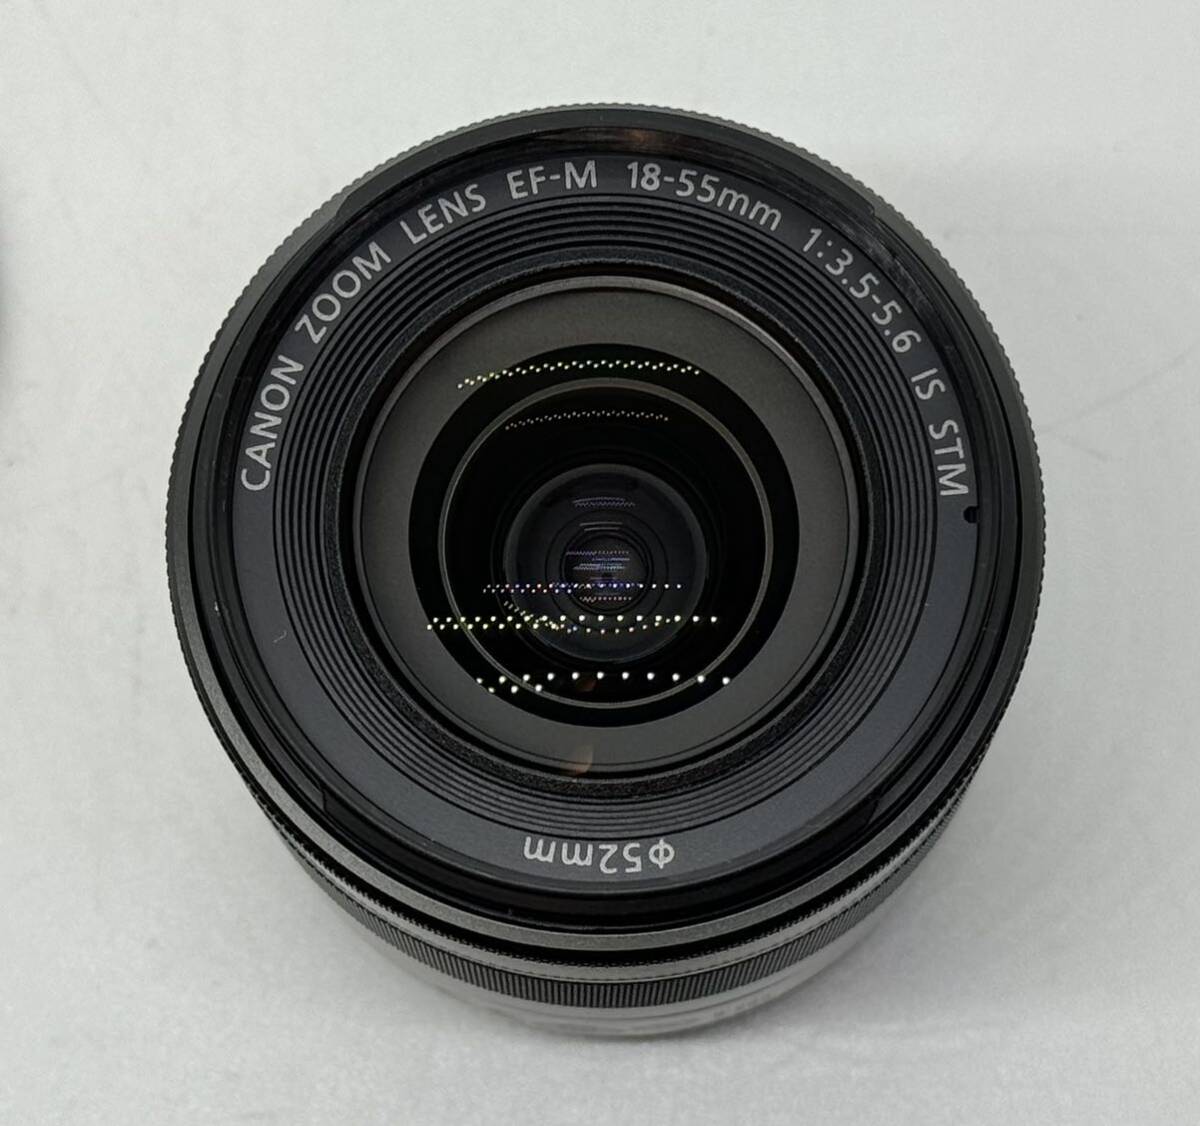  beautiful goods CANON ZOOM LENS EF-M 18-55mm 1:3.5-5.6 IS STM operation verification settled [HH120]